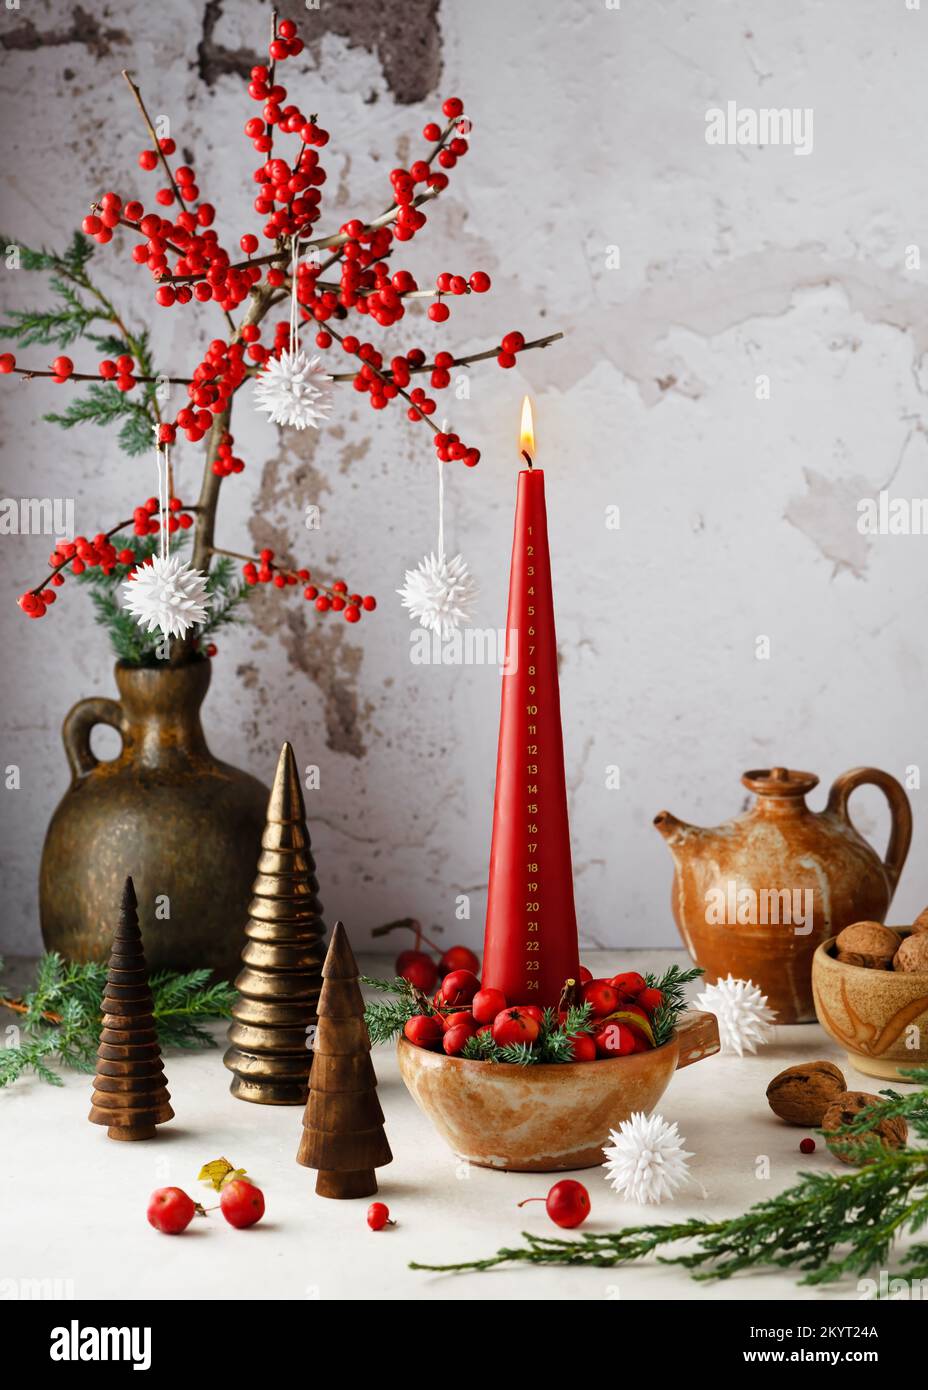 Burning Advent calendar candle with December month date 24 numbers and red holly ilex branch. Christmas home decoration concept. Copy space. Stock Photo